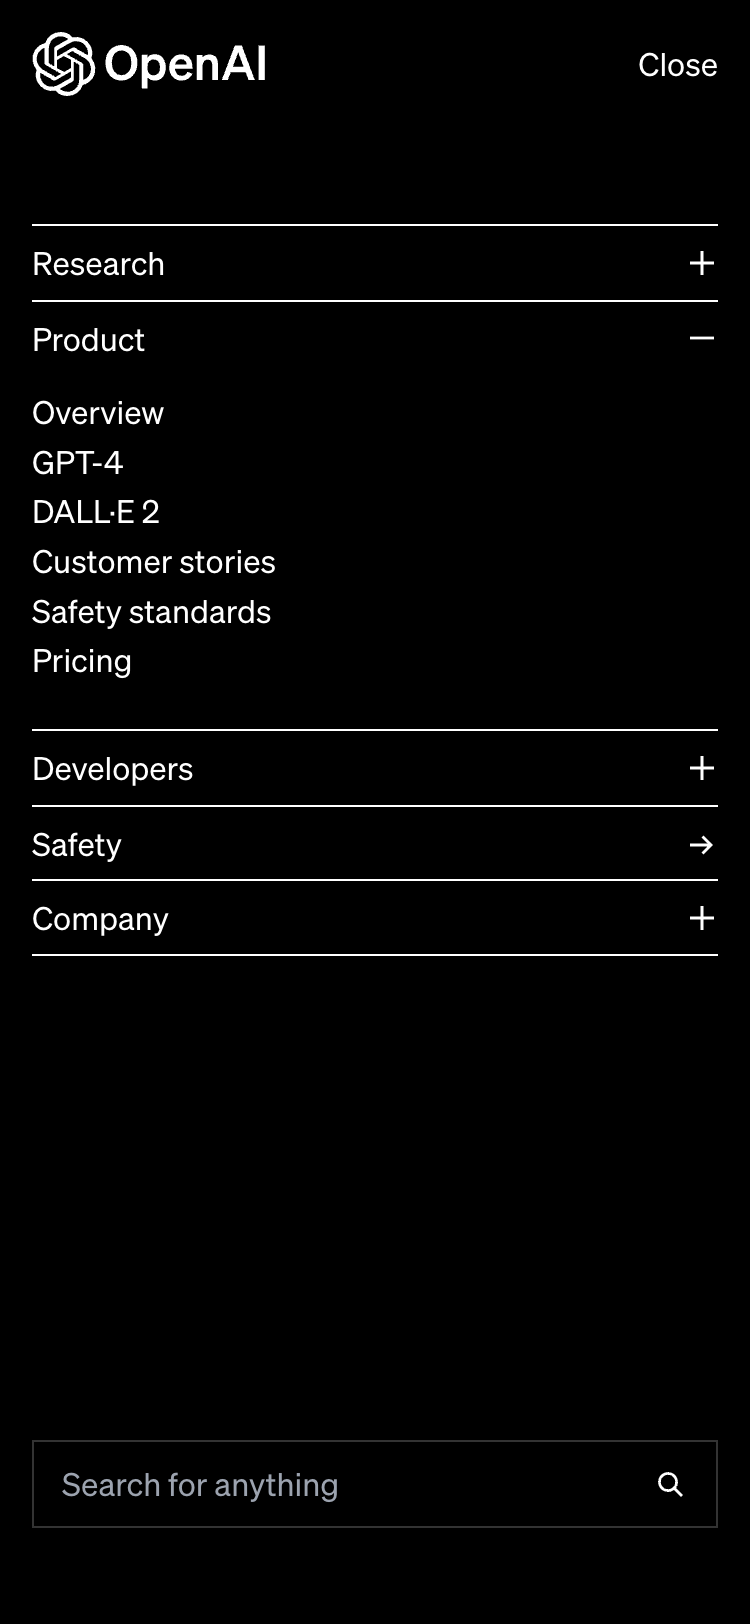 Screenshot of the OpenAI website on a 375-pixel wide mobile device. The background color is black with white text, and each menu item that can be expanded shows a plus icon. The menu items that are just a link shows an arrow icon instead.